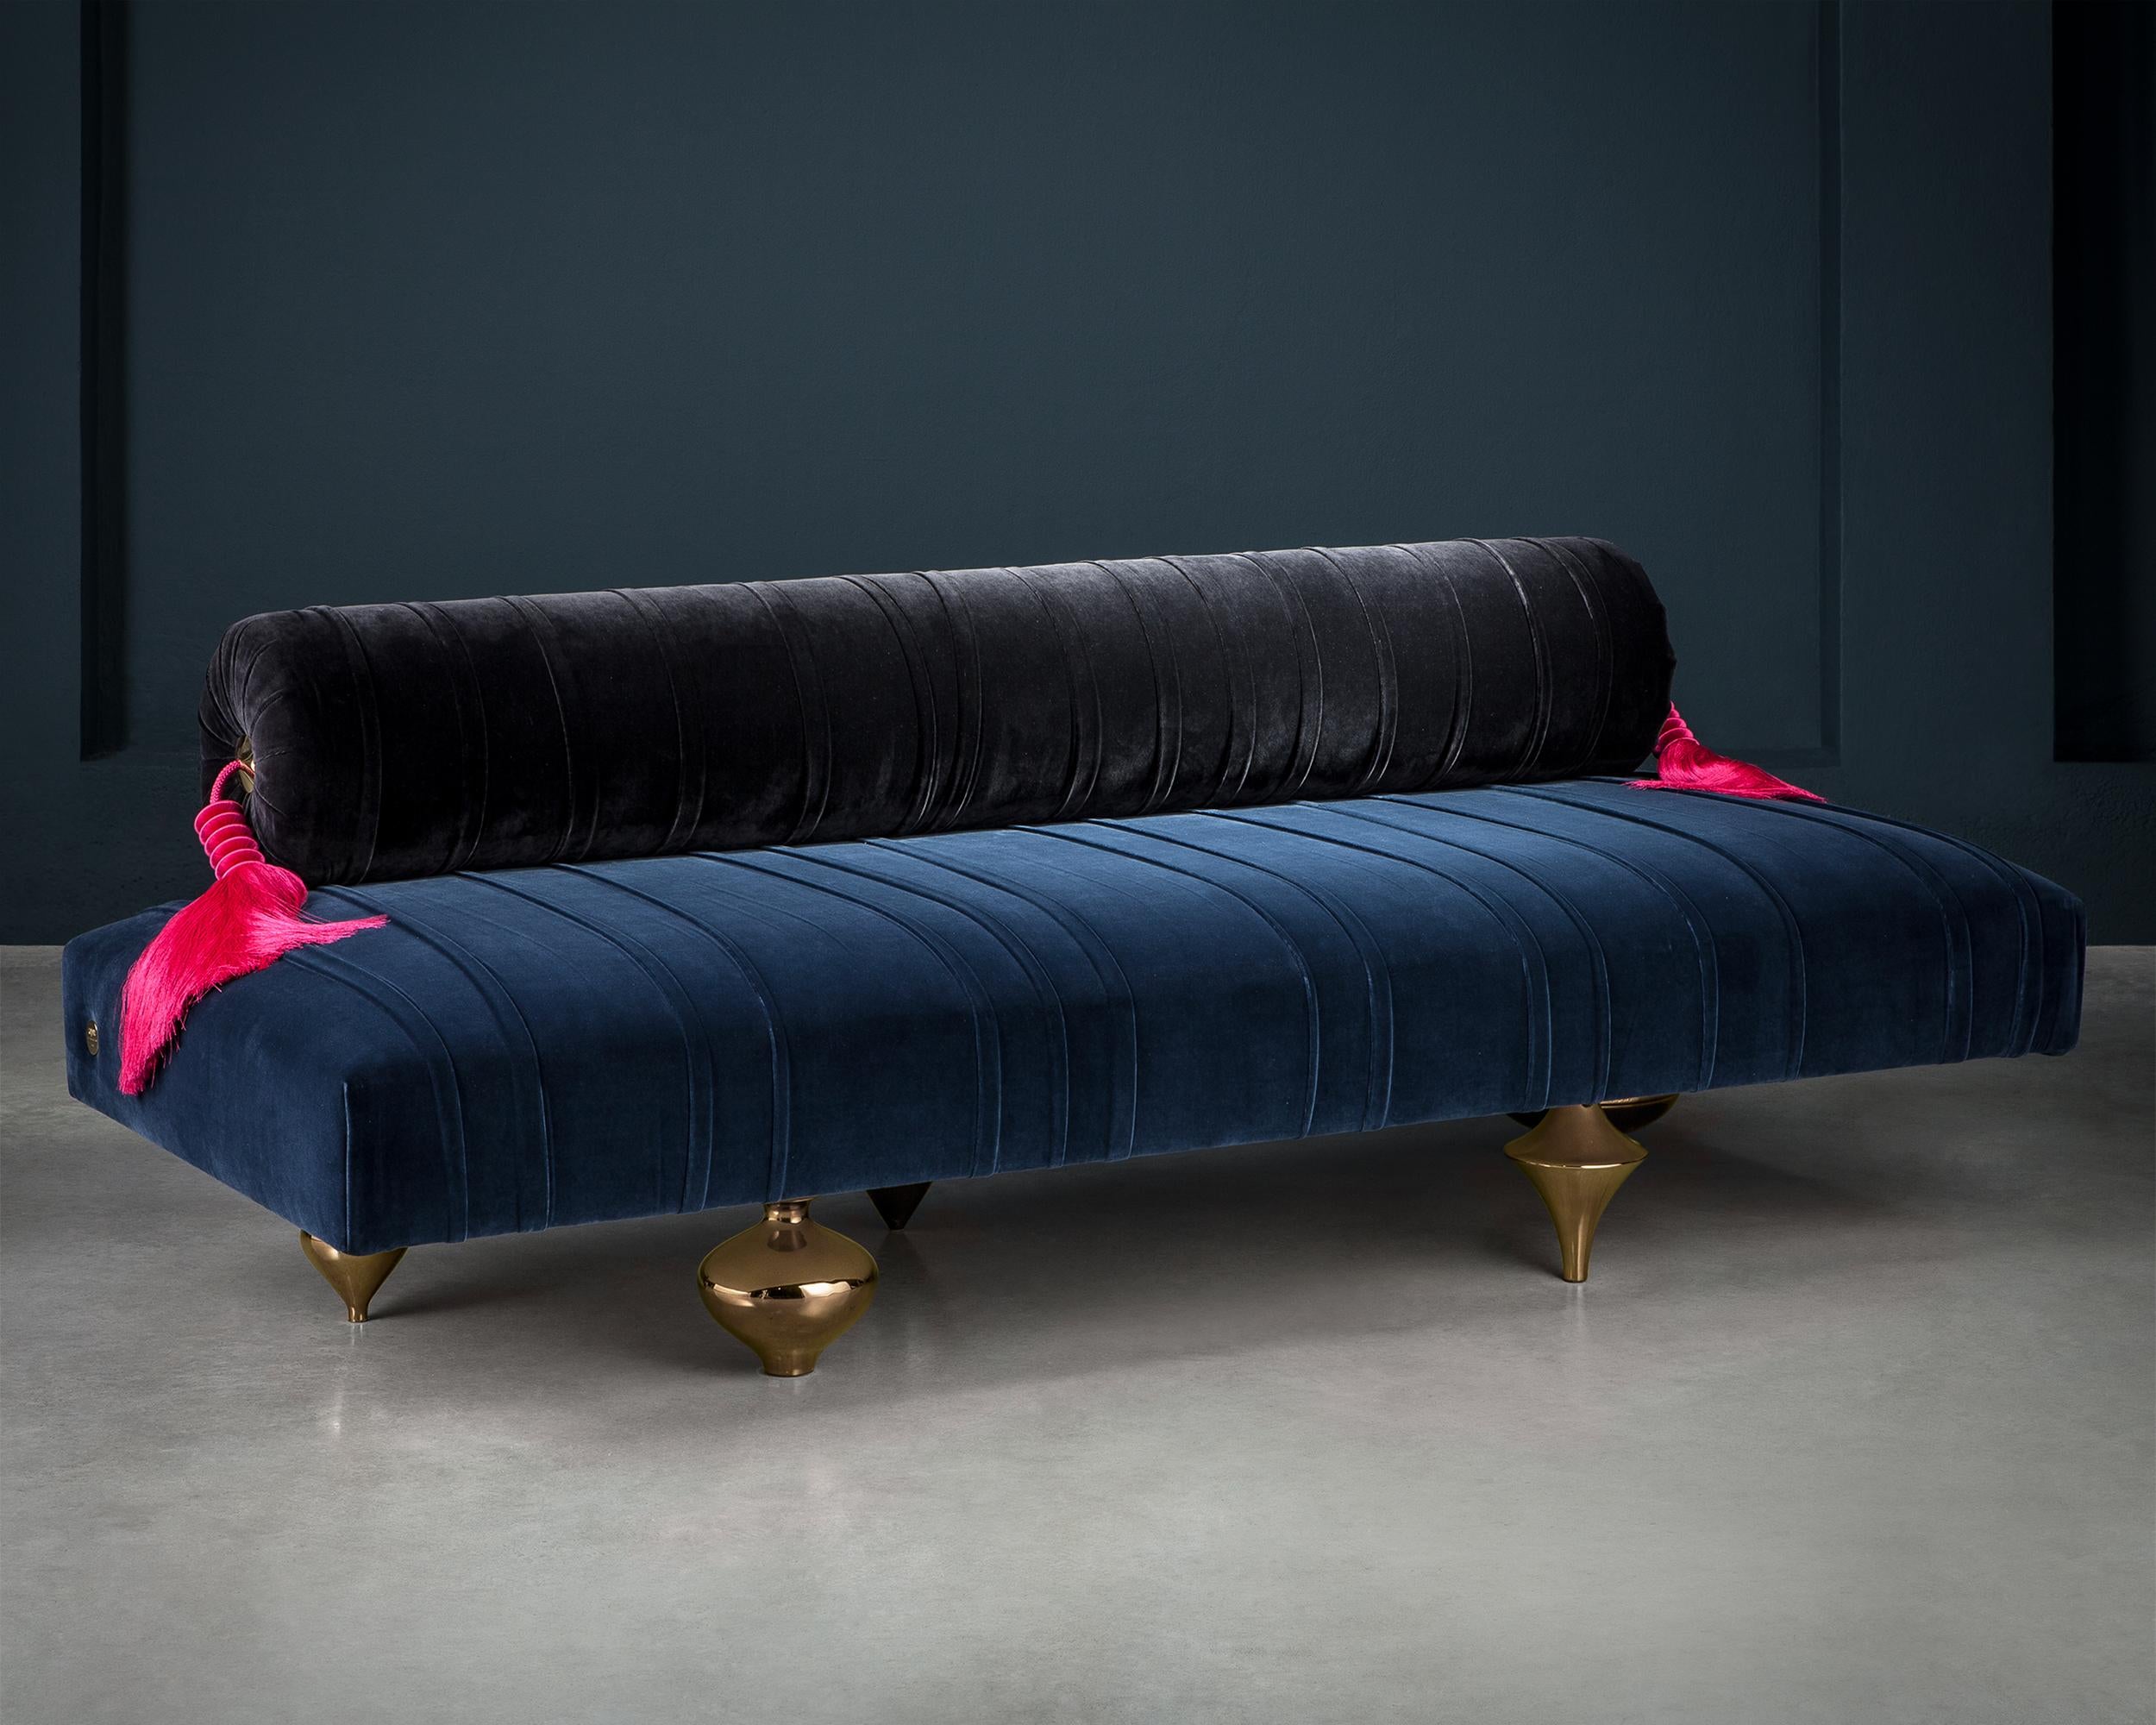 An alternation of rounded shapes and geometrical lines, reassuming discipline and freedom, a composite, multiethnic plan where every element and material harmoniously contributes to the overall balance of the piece.
Il Pezzo 1 Daybed is expertly